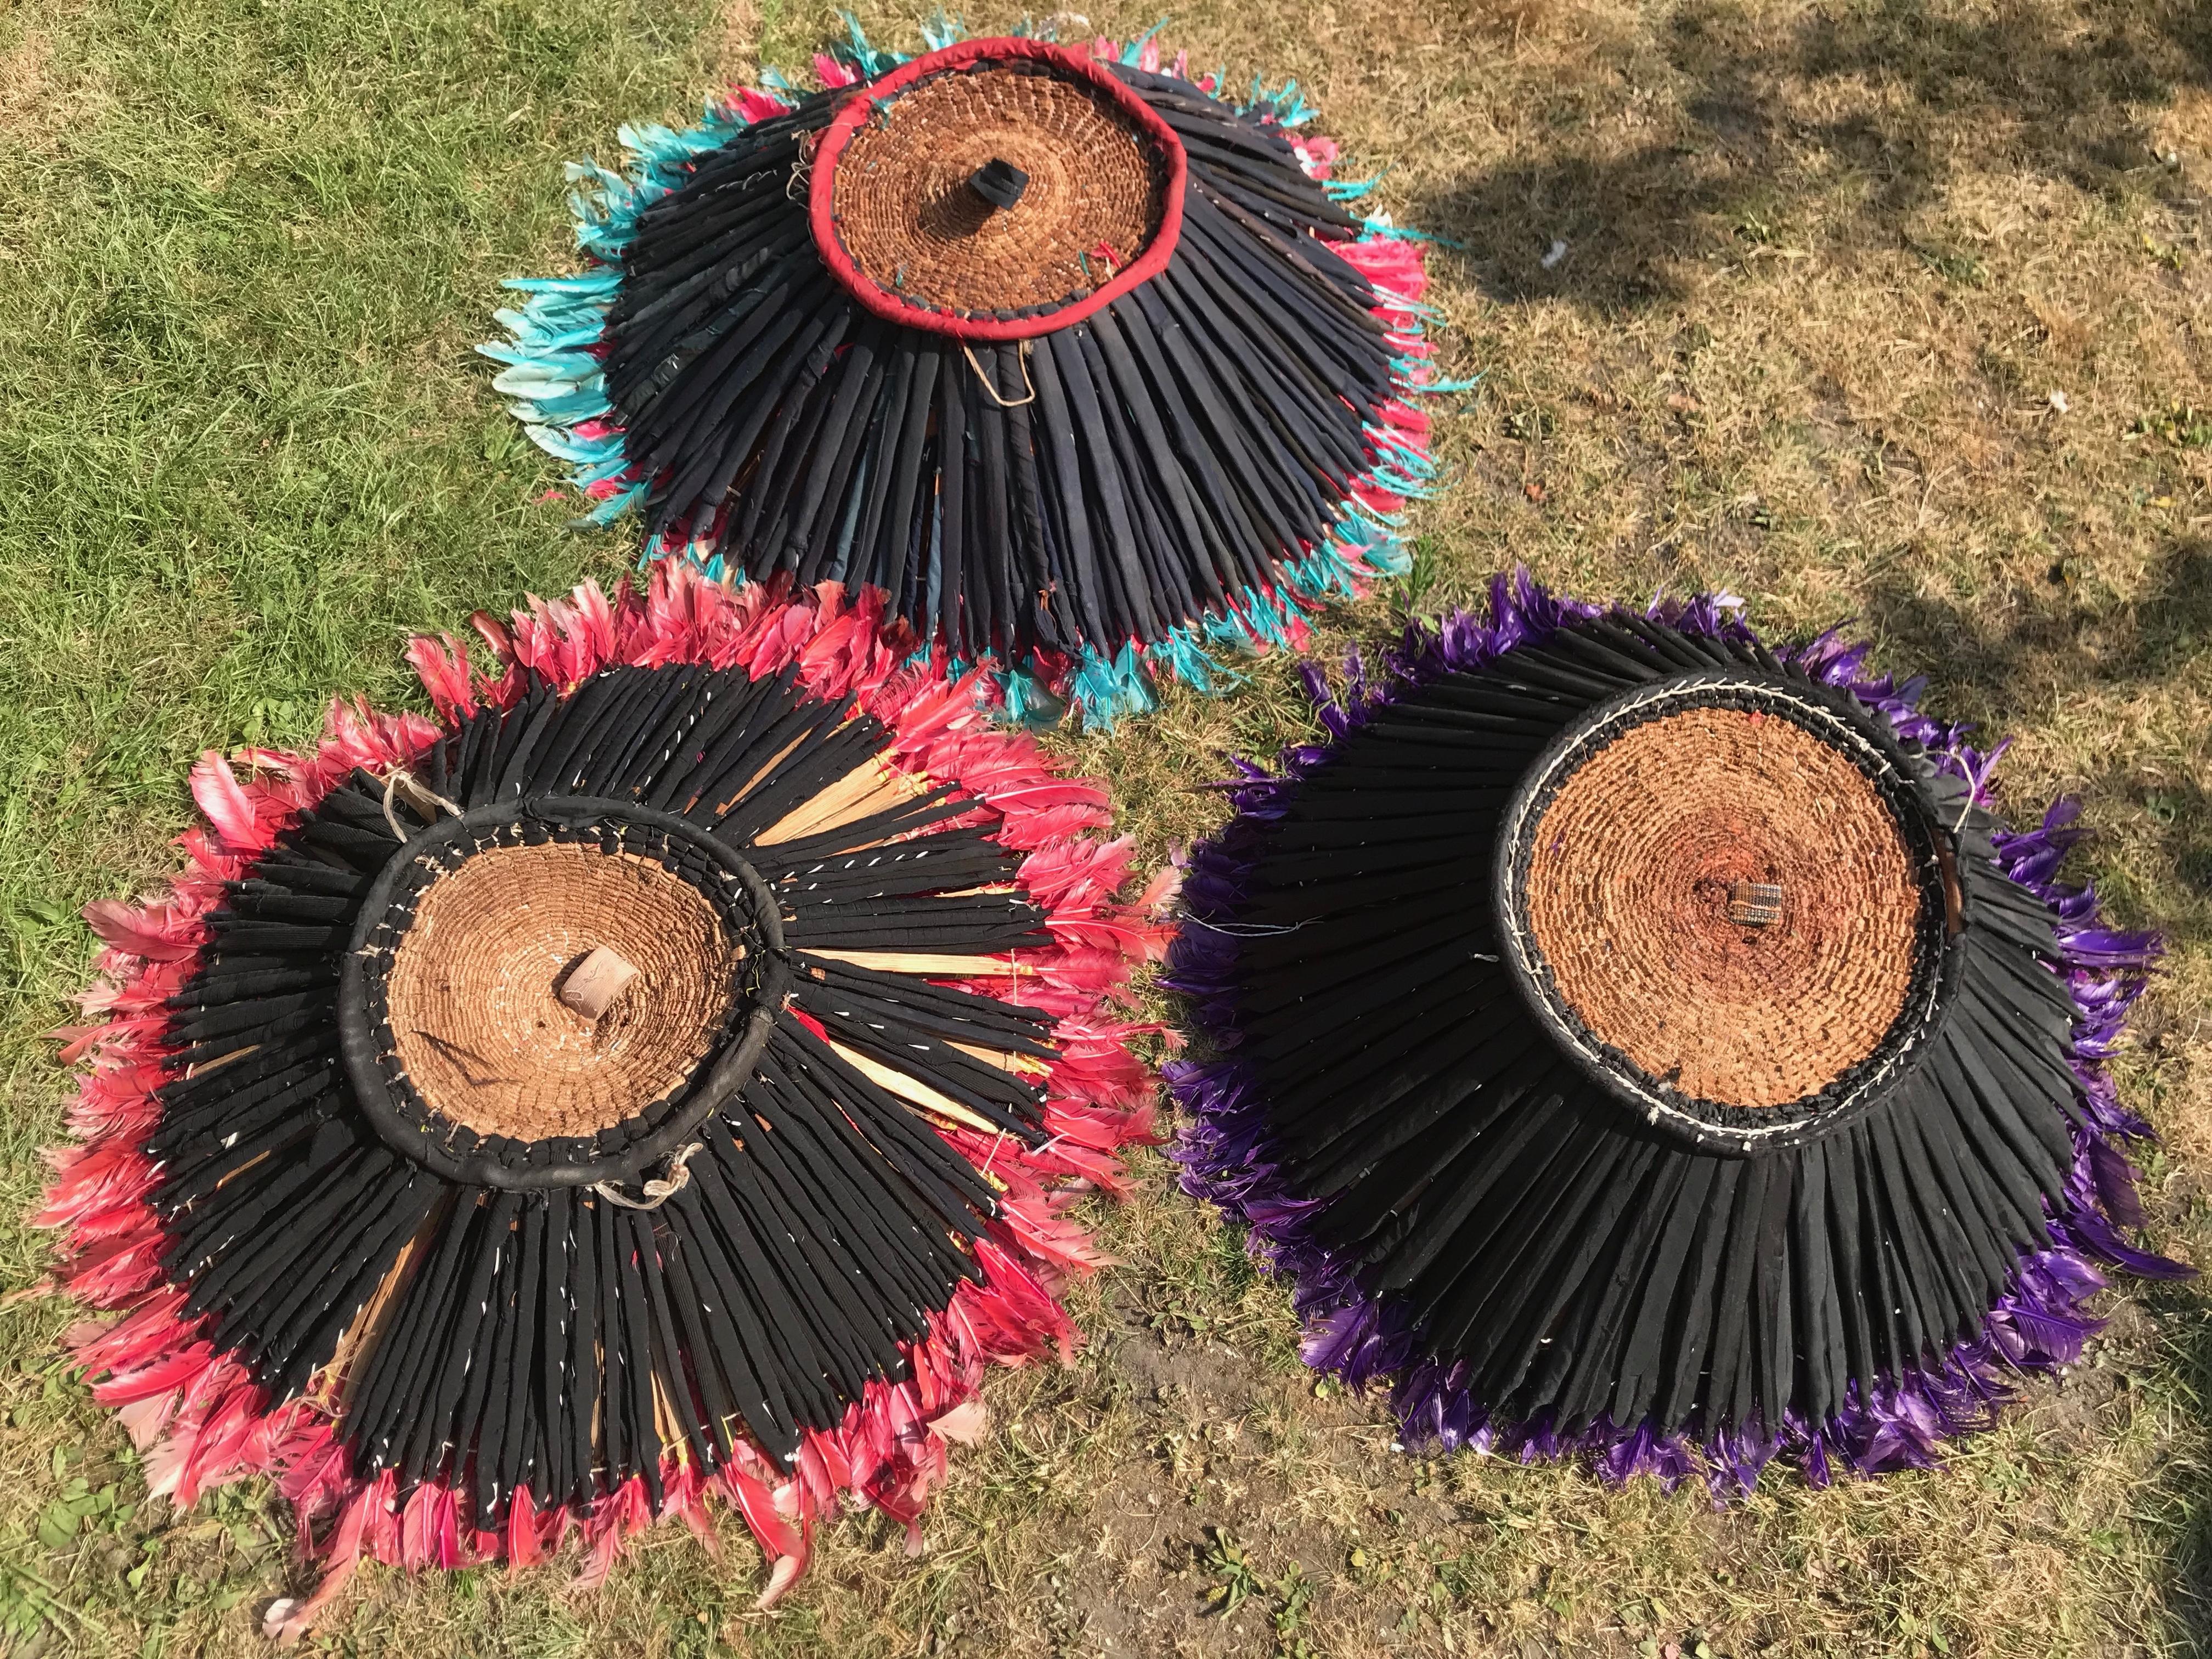 The hat itself is constructed from raffia which is woven by hand to create the support structure. A strap attached to the back is used to pull the hat open to its full breadth. These headdresses are stunning as contemporary wall hangings.Made in the